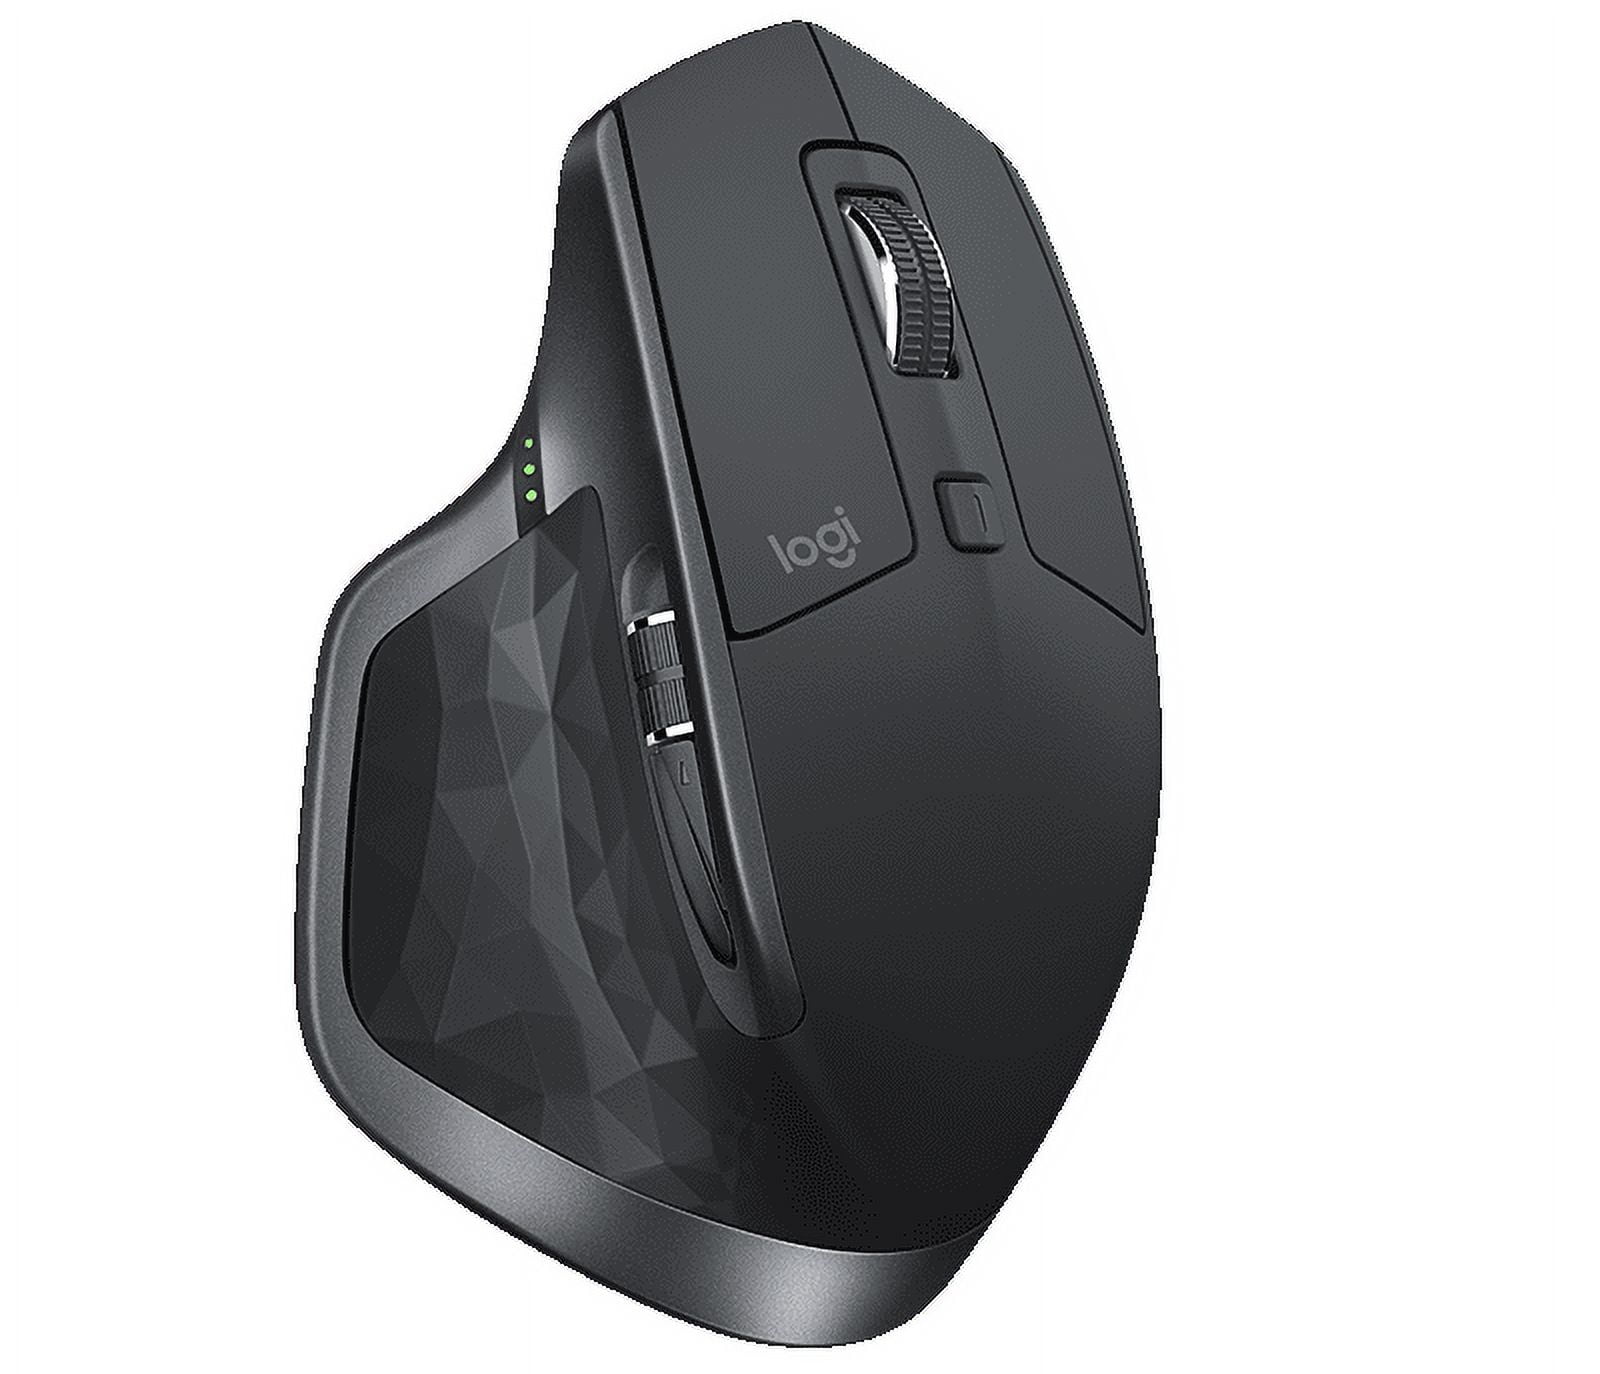 Logitech MX Master 2S wireless mouse is on sale for 40% off at